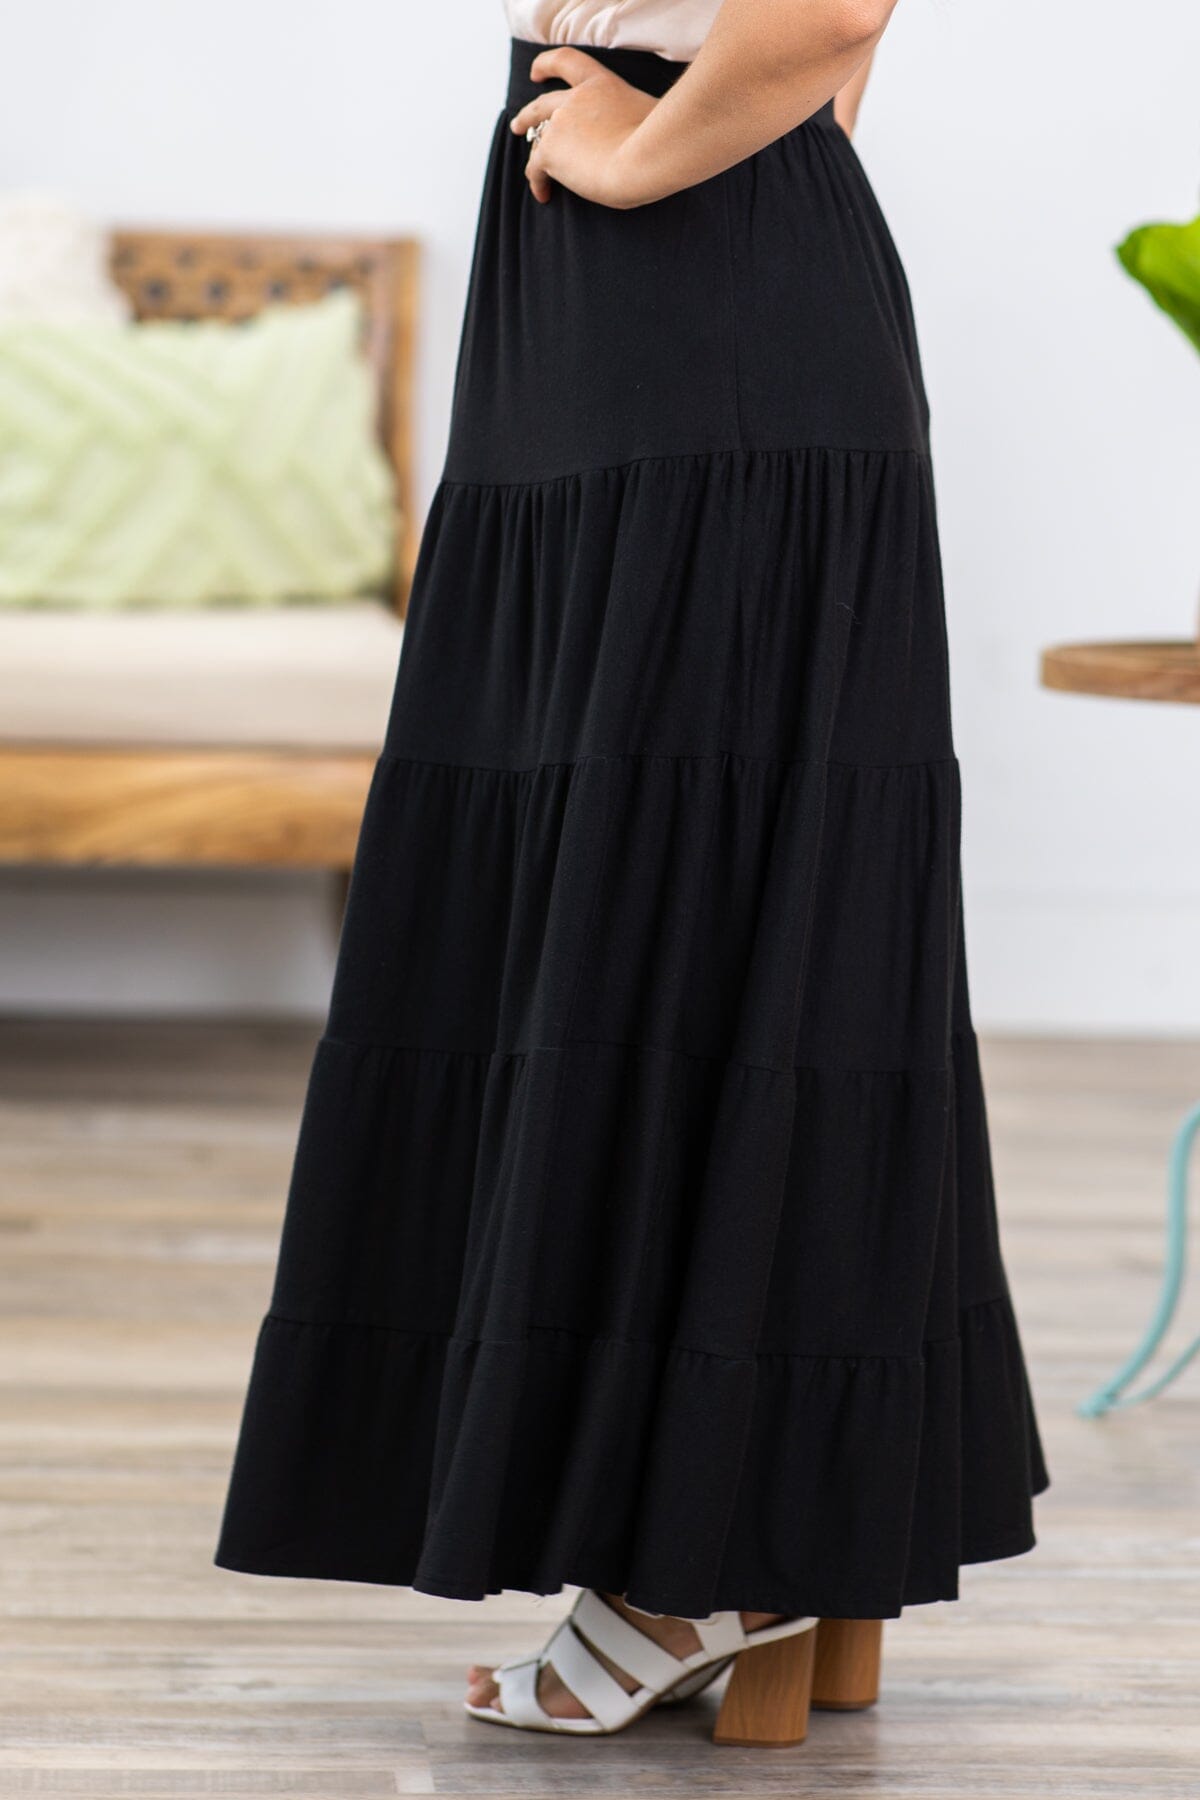 Black Tiered Pull On Maxi Skirt - Filly Flair